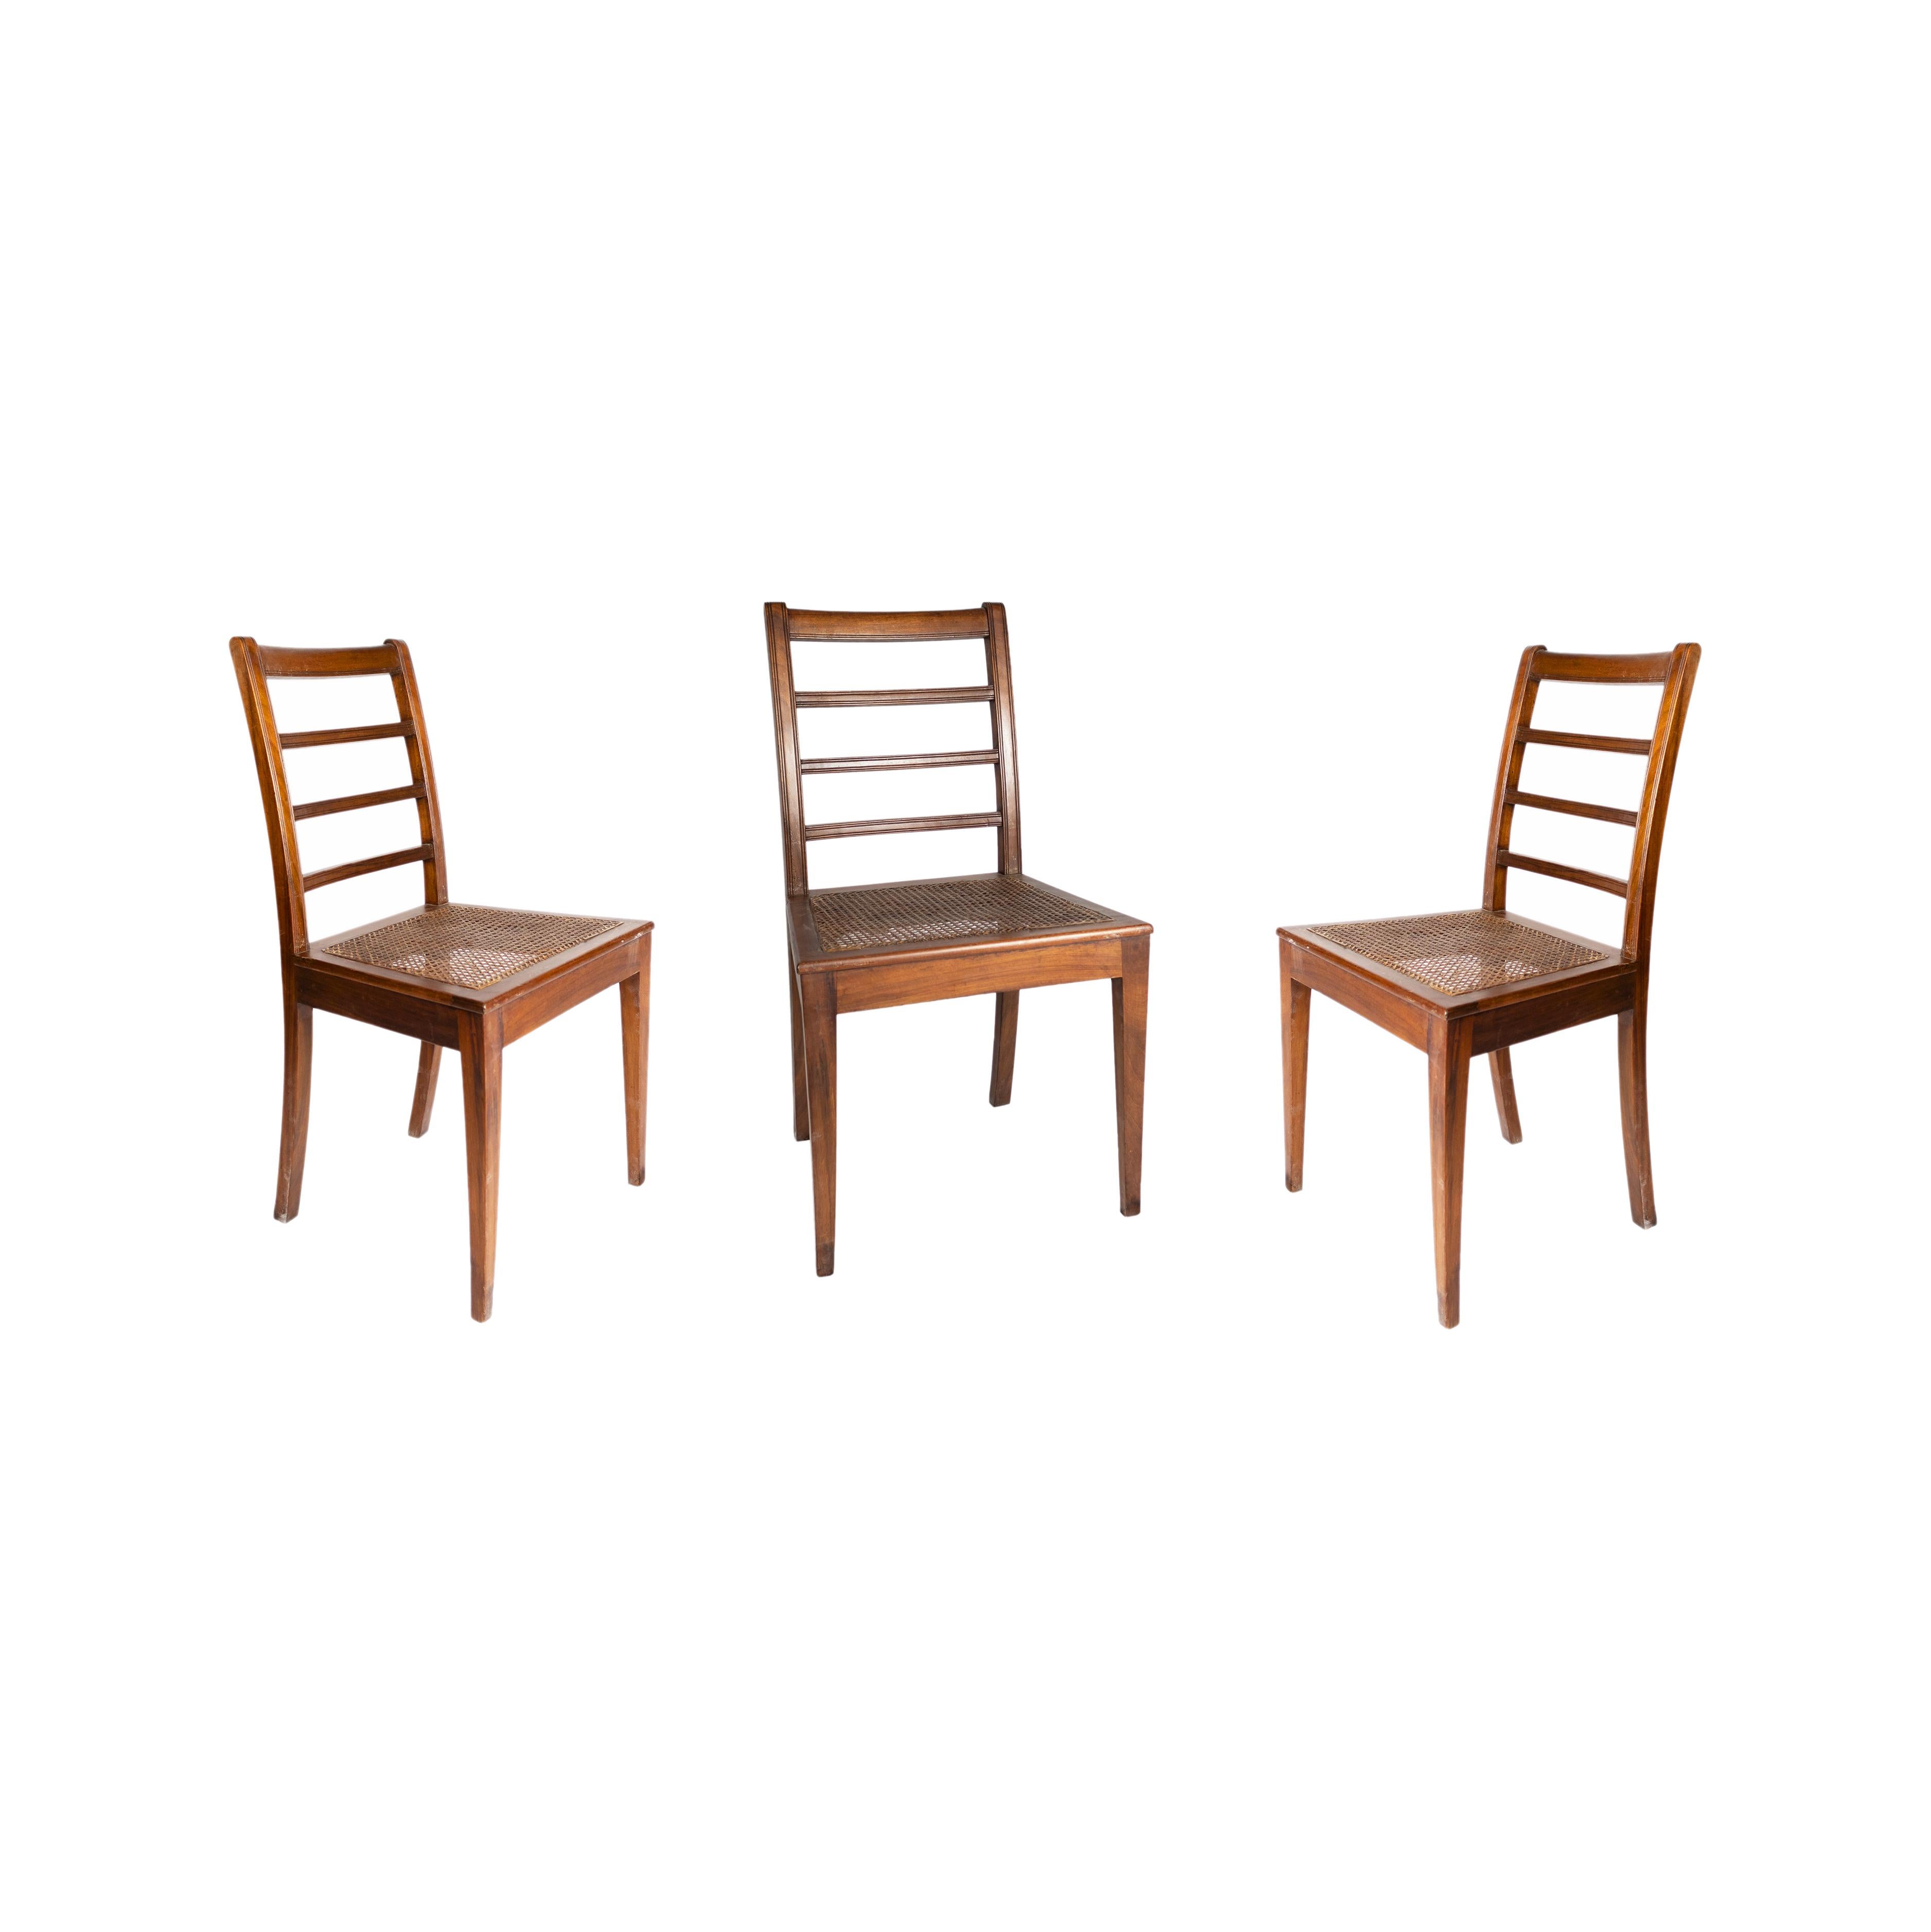 A set of 6 lovingly maintained chairs with full natural straw upholstery and linear inlay detail, recently inspected by a carpenter. Excellent condition.
Dimensions: Height 89 cm Length 50 cm Seat height 45.5 cm 
Sold As: Set of 6
